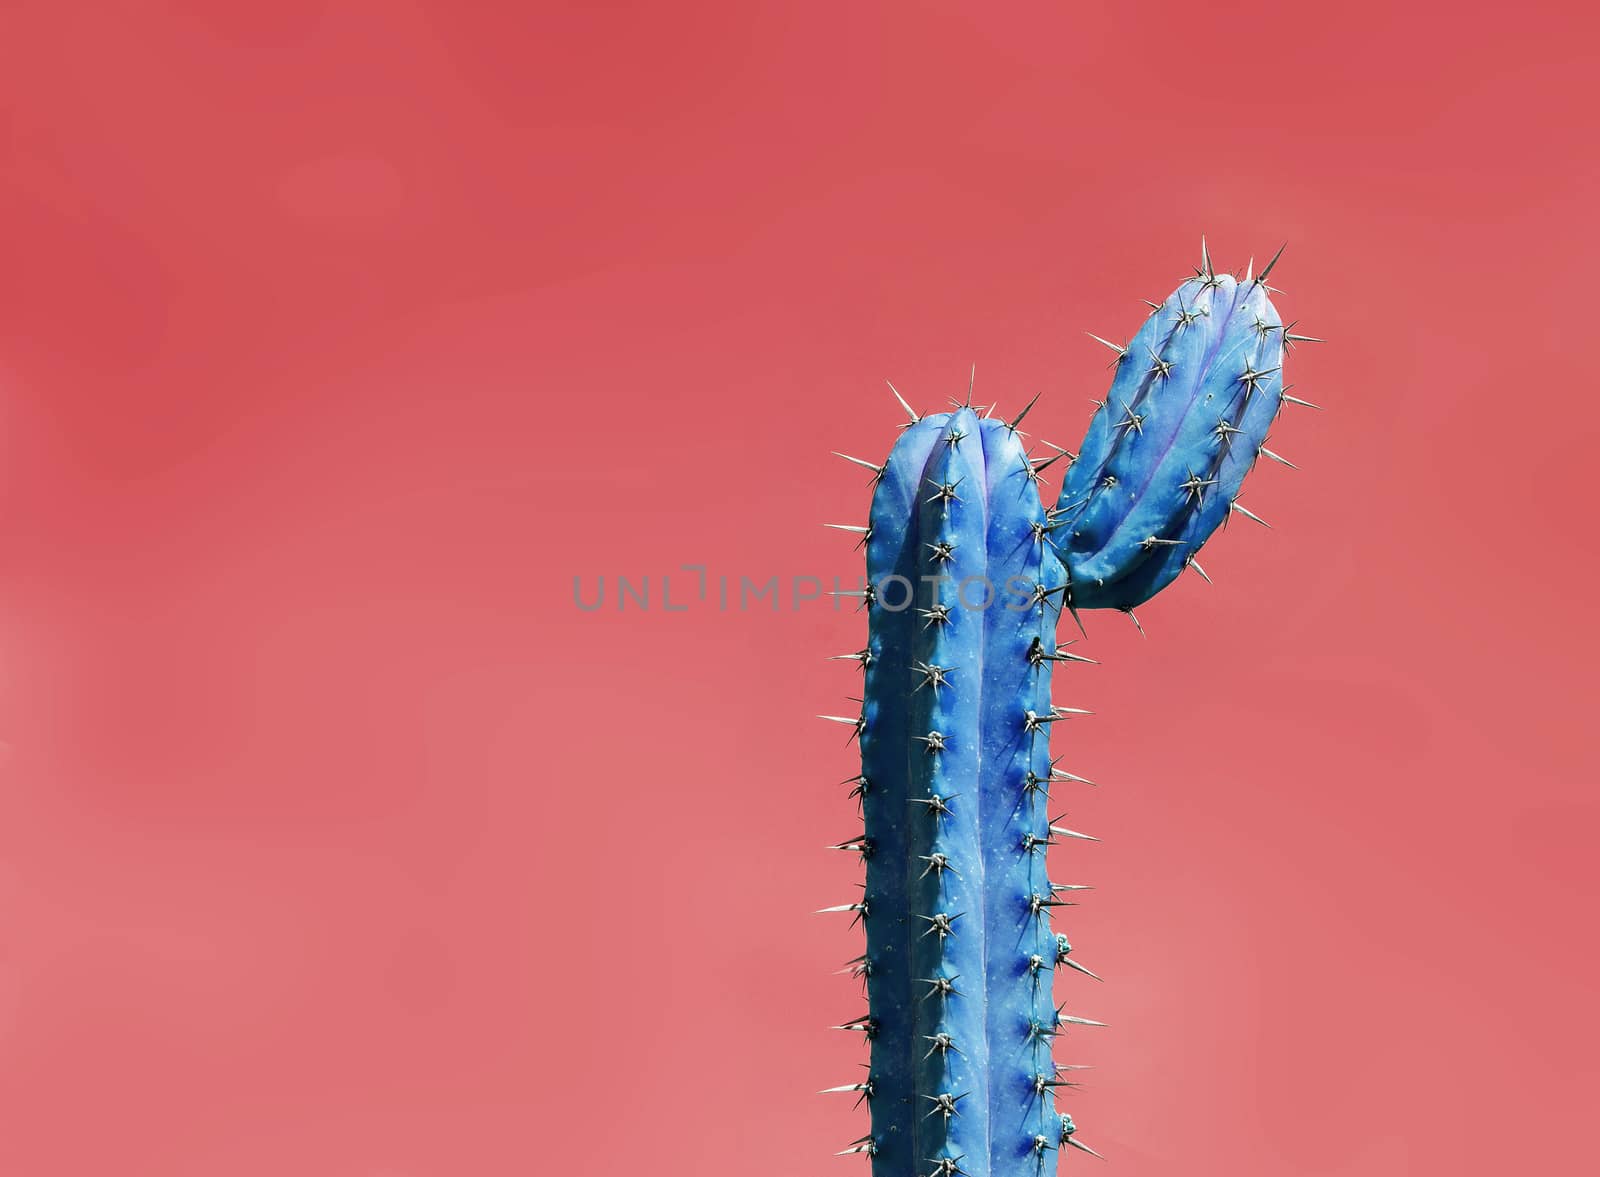 Surrealistic abstract blue thorny cactus with funny shape  by ArtesiaWells